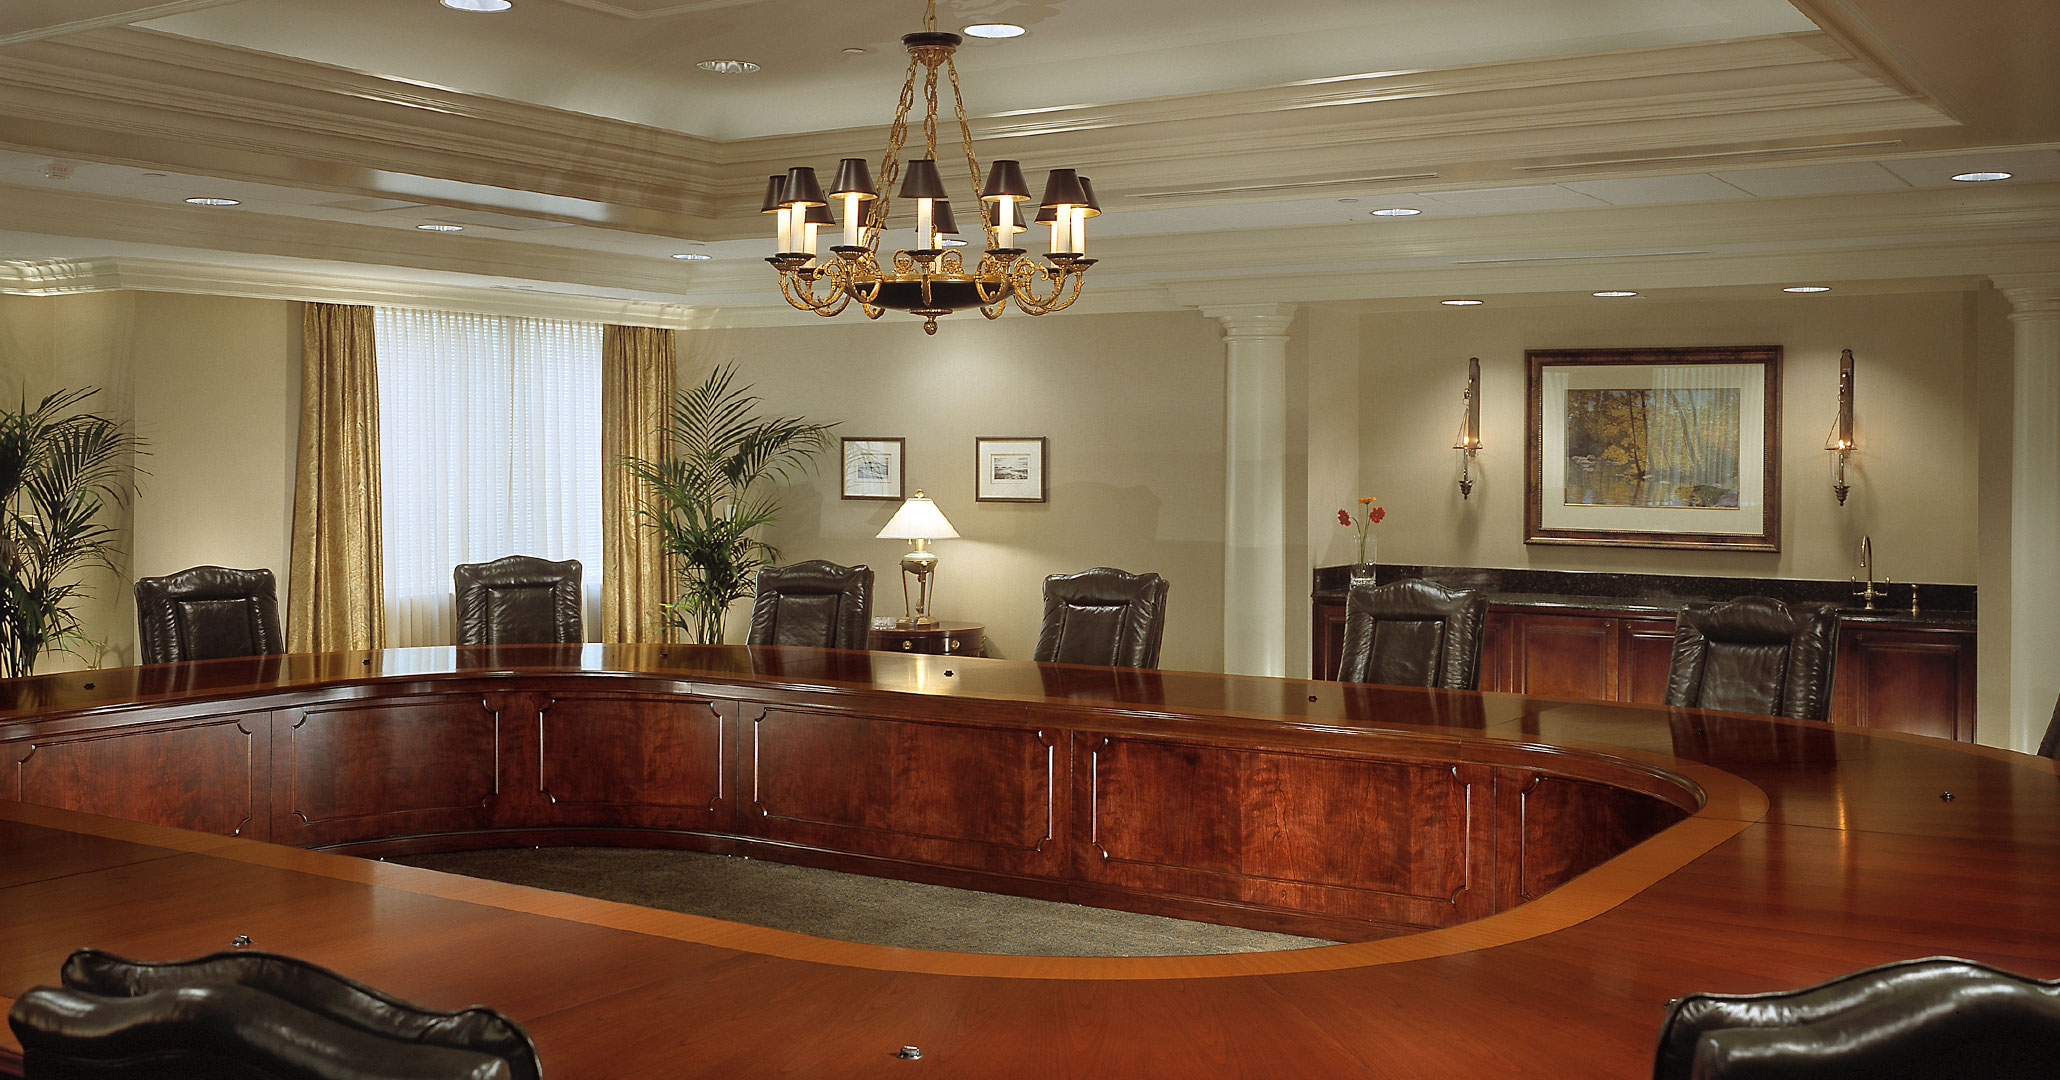 Boudreaux architects provided interior design services for South State Bank for their traditional office spaces.